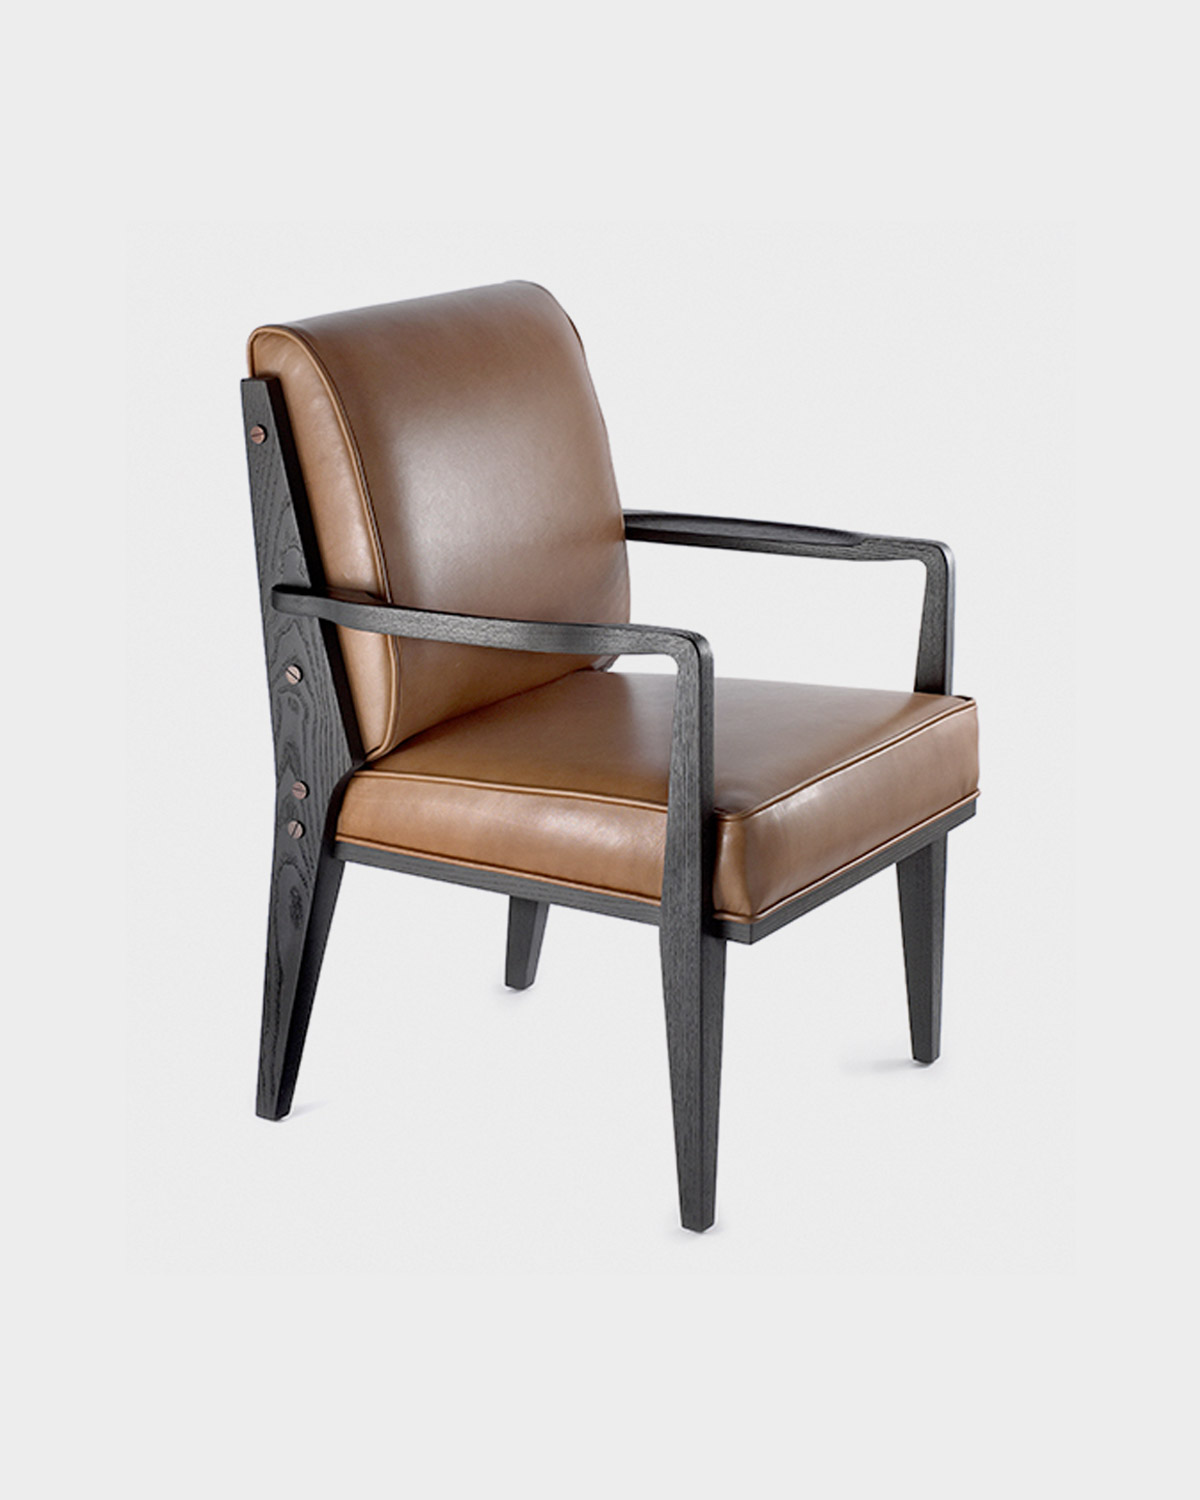 The Thierry Arm Dining Chair by Studio Van den Akker